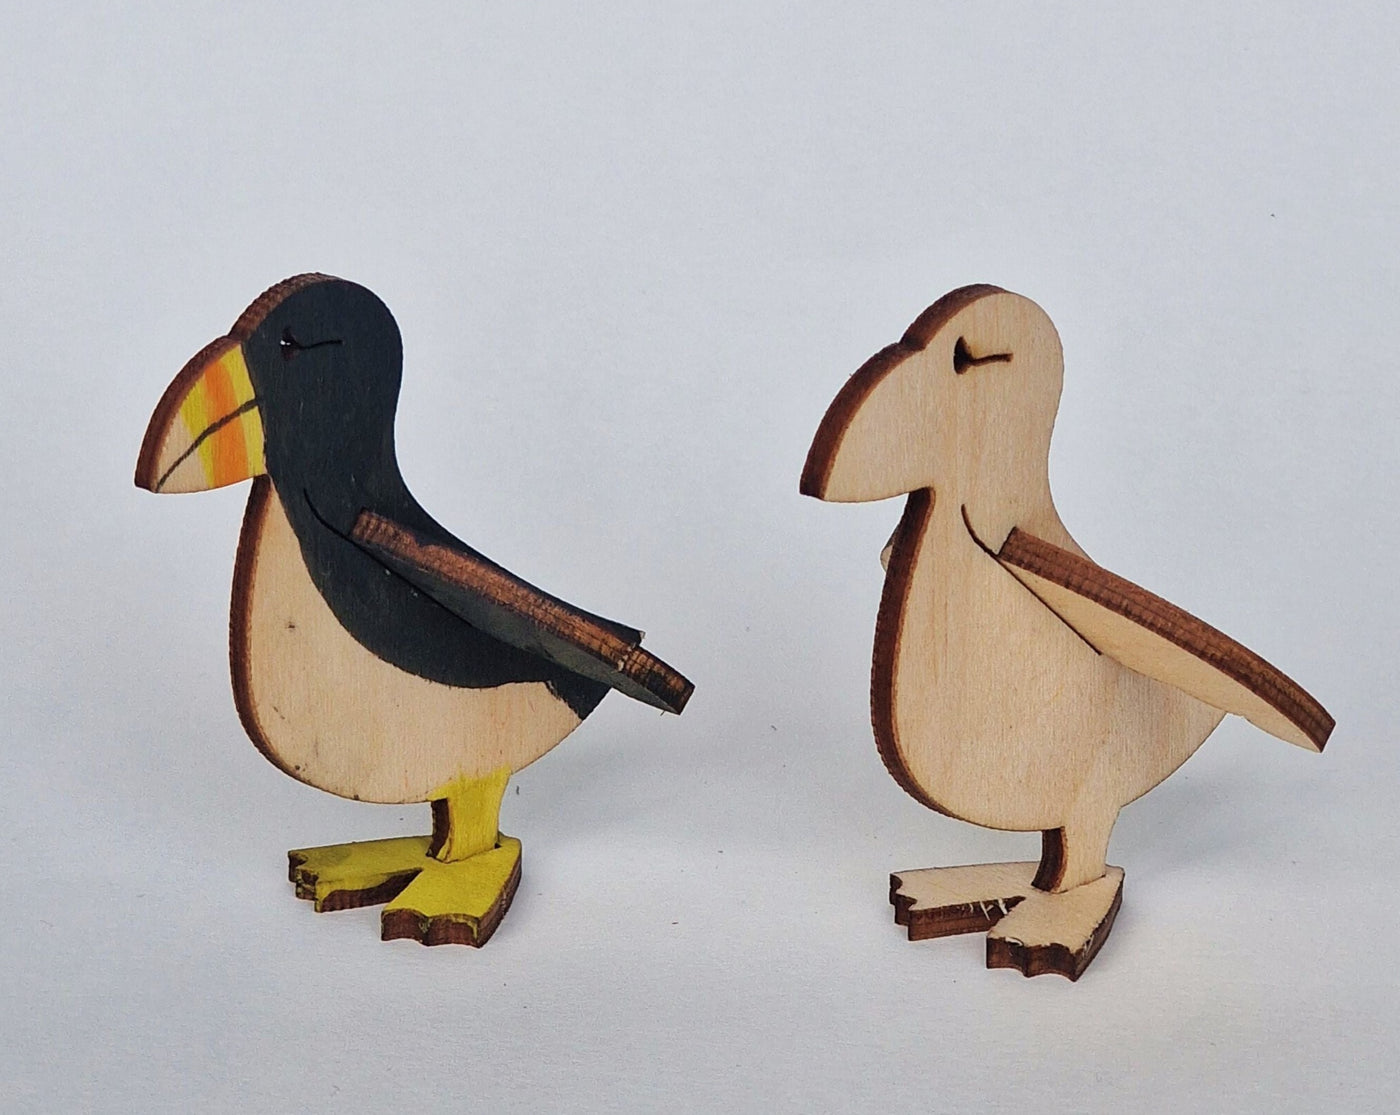 Wooden Puffin Model